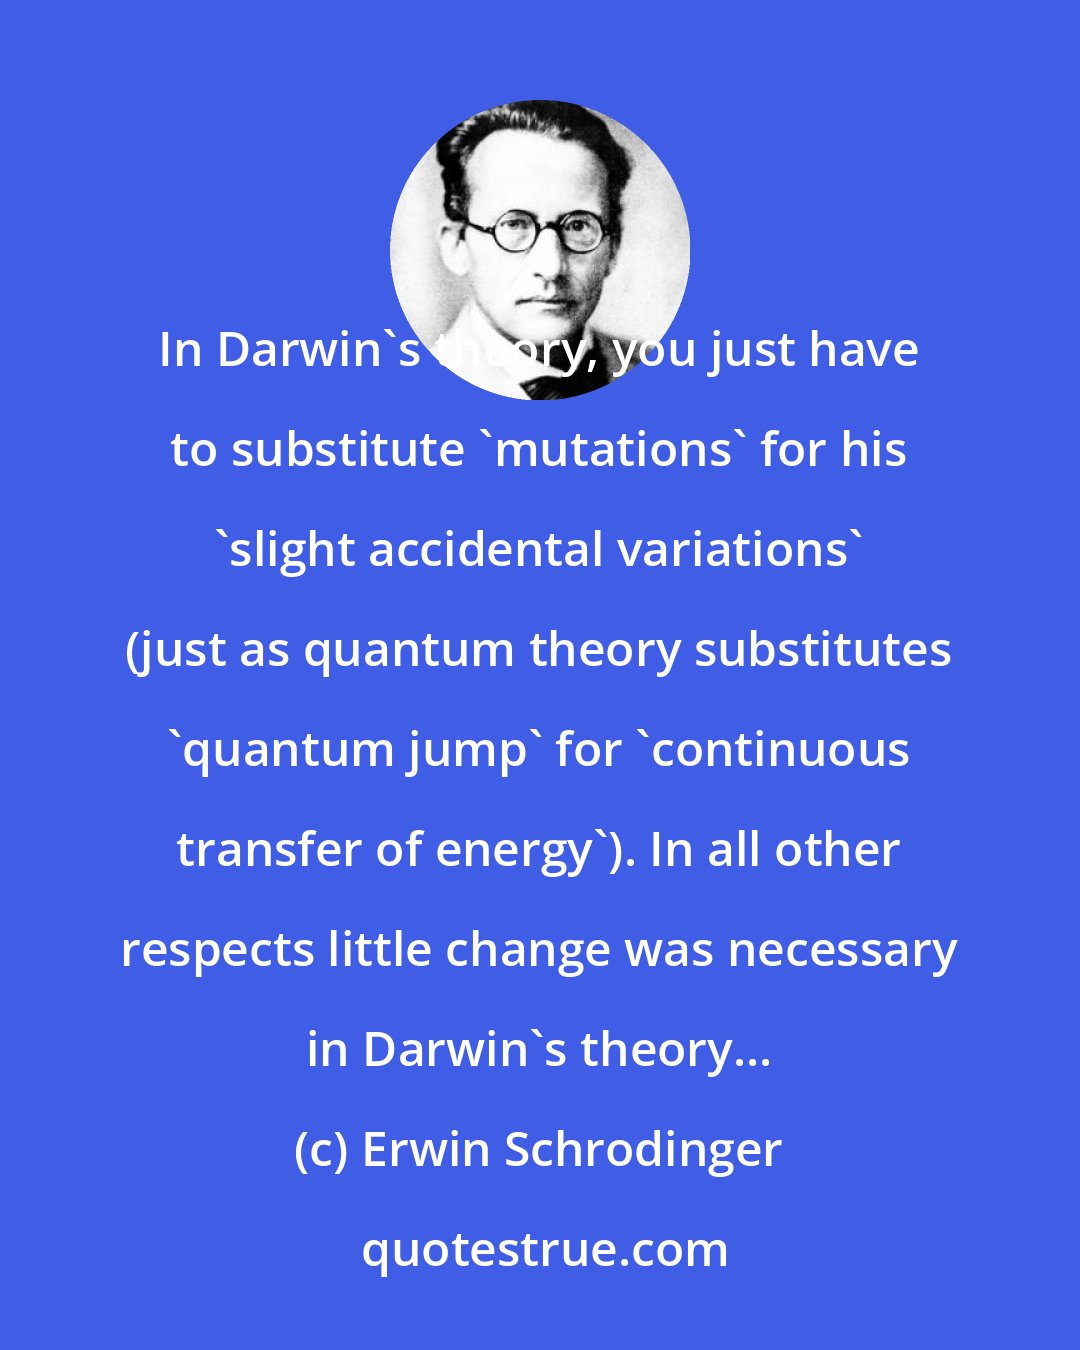 Erwin Schrodinger: In Darwin's theory, you just have to substitute 'mutations' for his 'slight accidental variations' (just as quantum theory substitutes 'quantum jump' for 'continuous transfer of energy'). In all other respects little change was necessary in Darwin's theory...